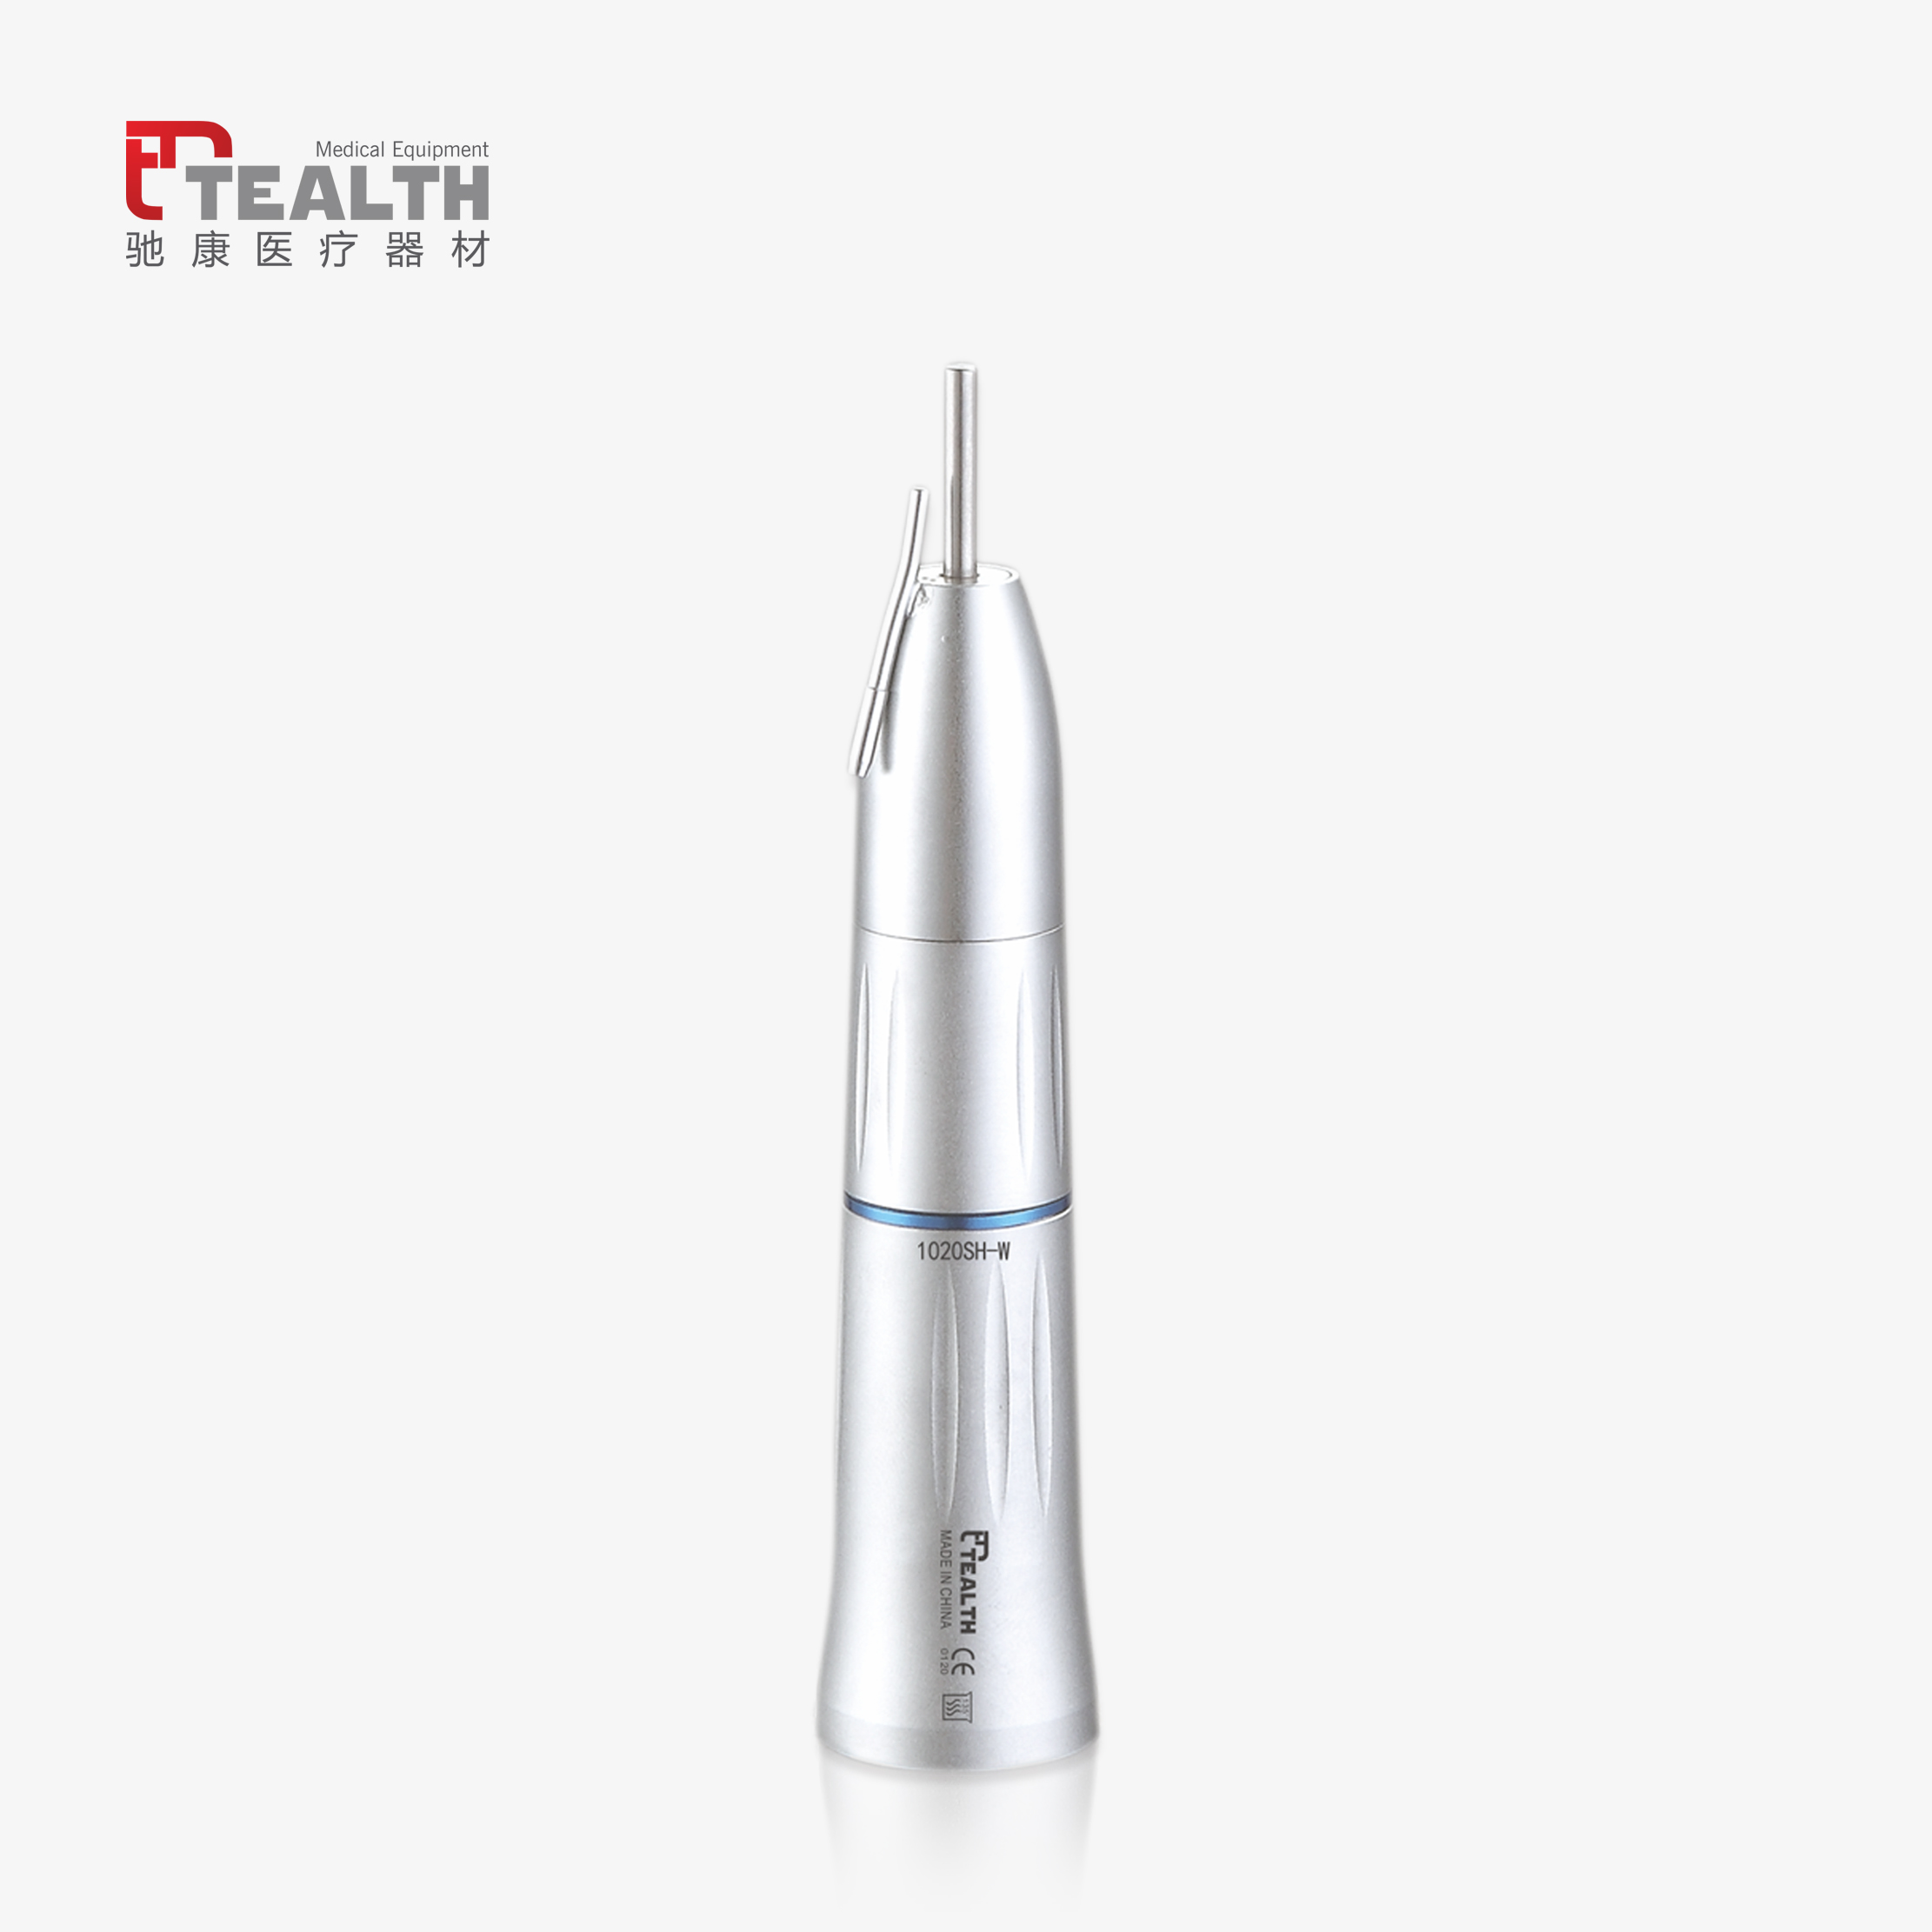 Surgical straight handpiece